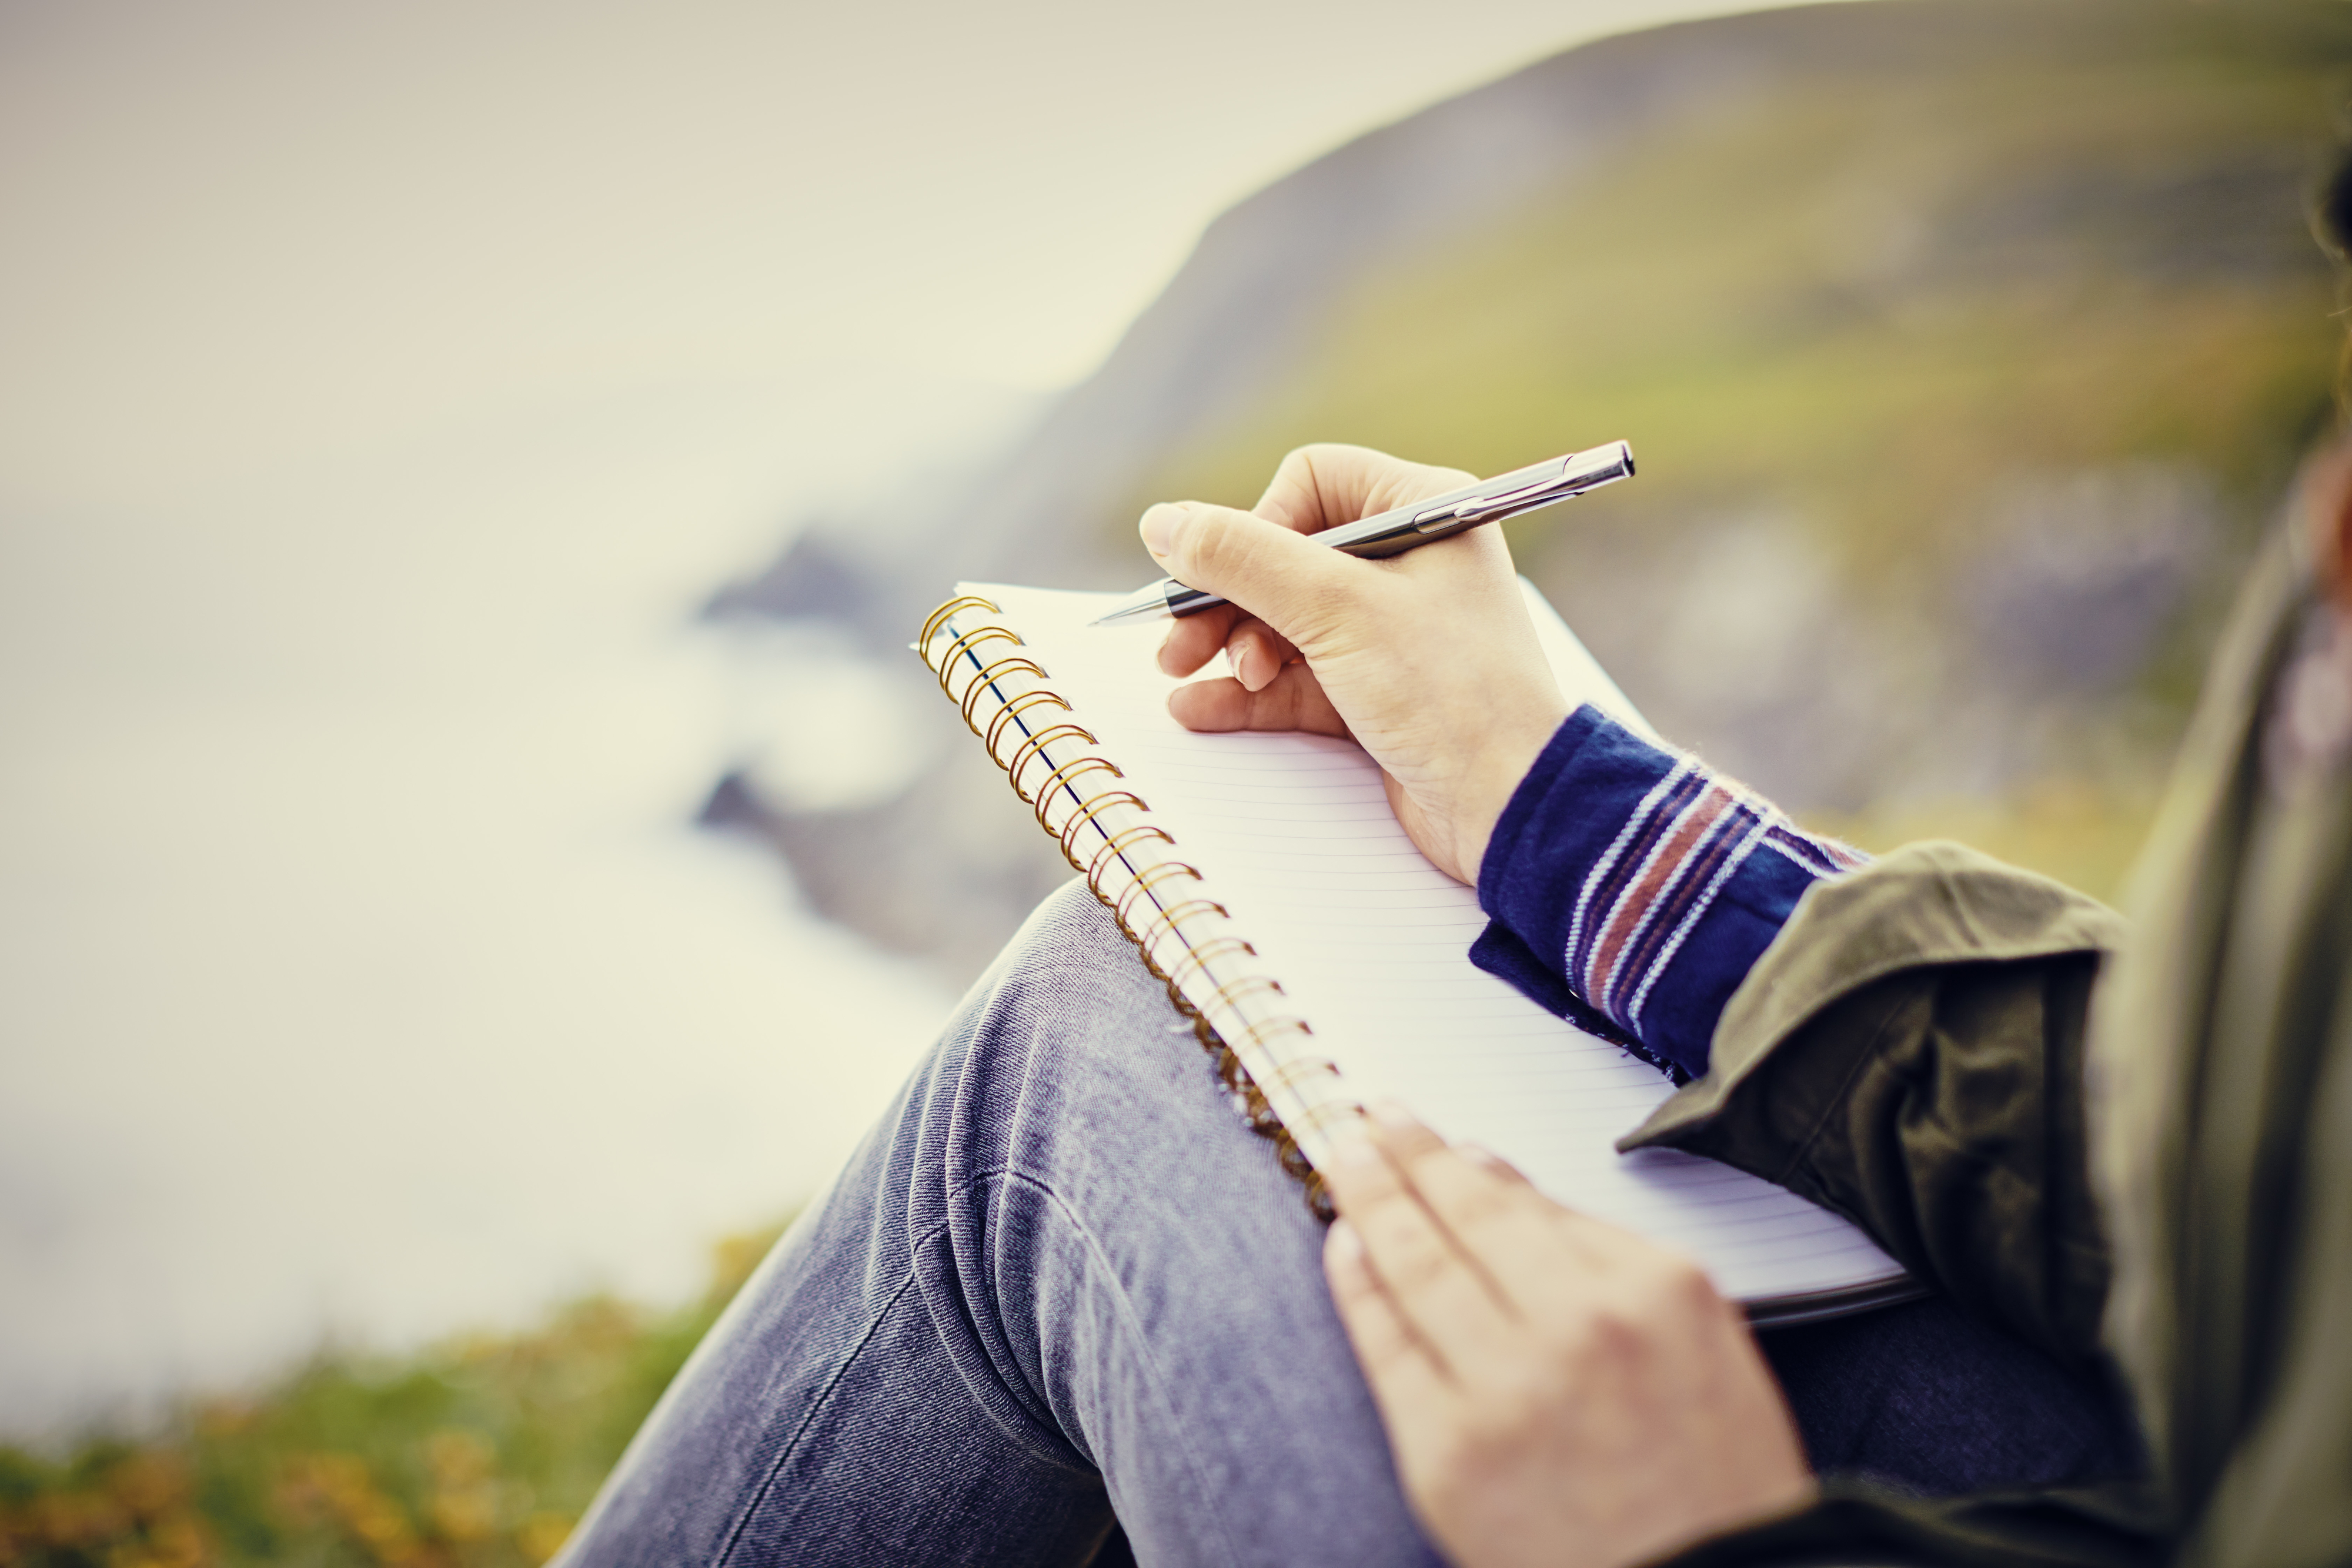 Person sitting outside writing in a spiral notebook with a pen, with nature in the background